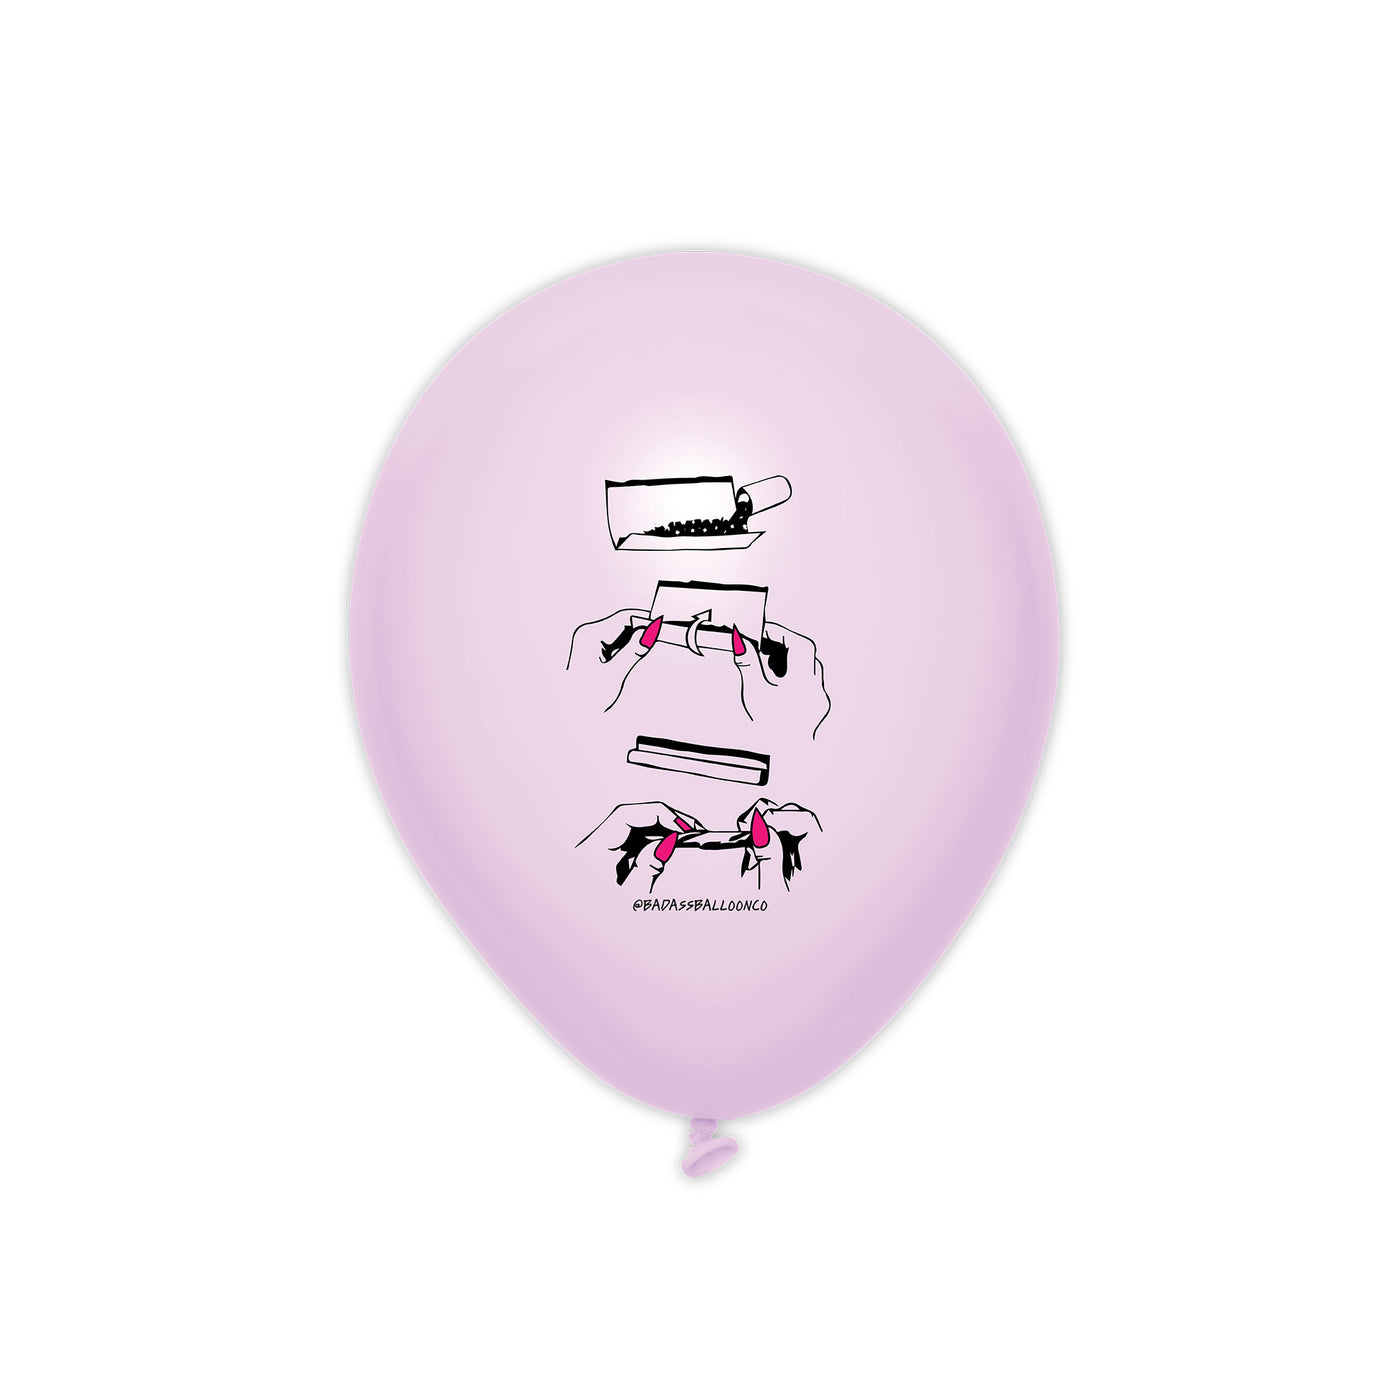 Joint Rolling Cannabis Party Balloon